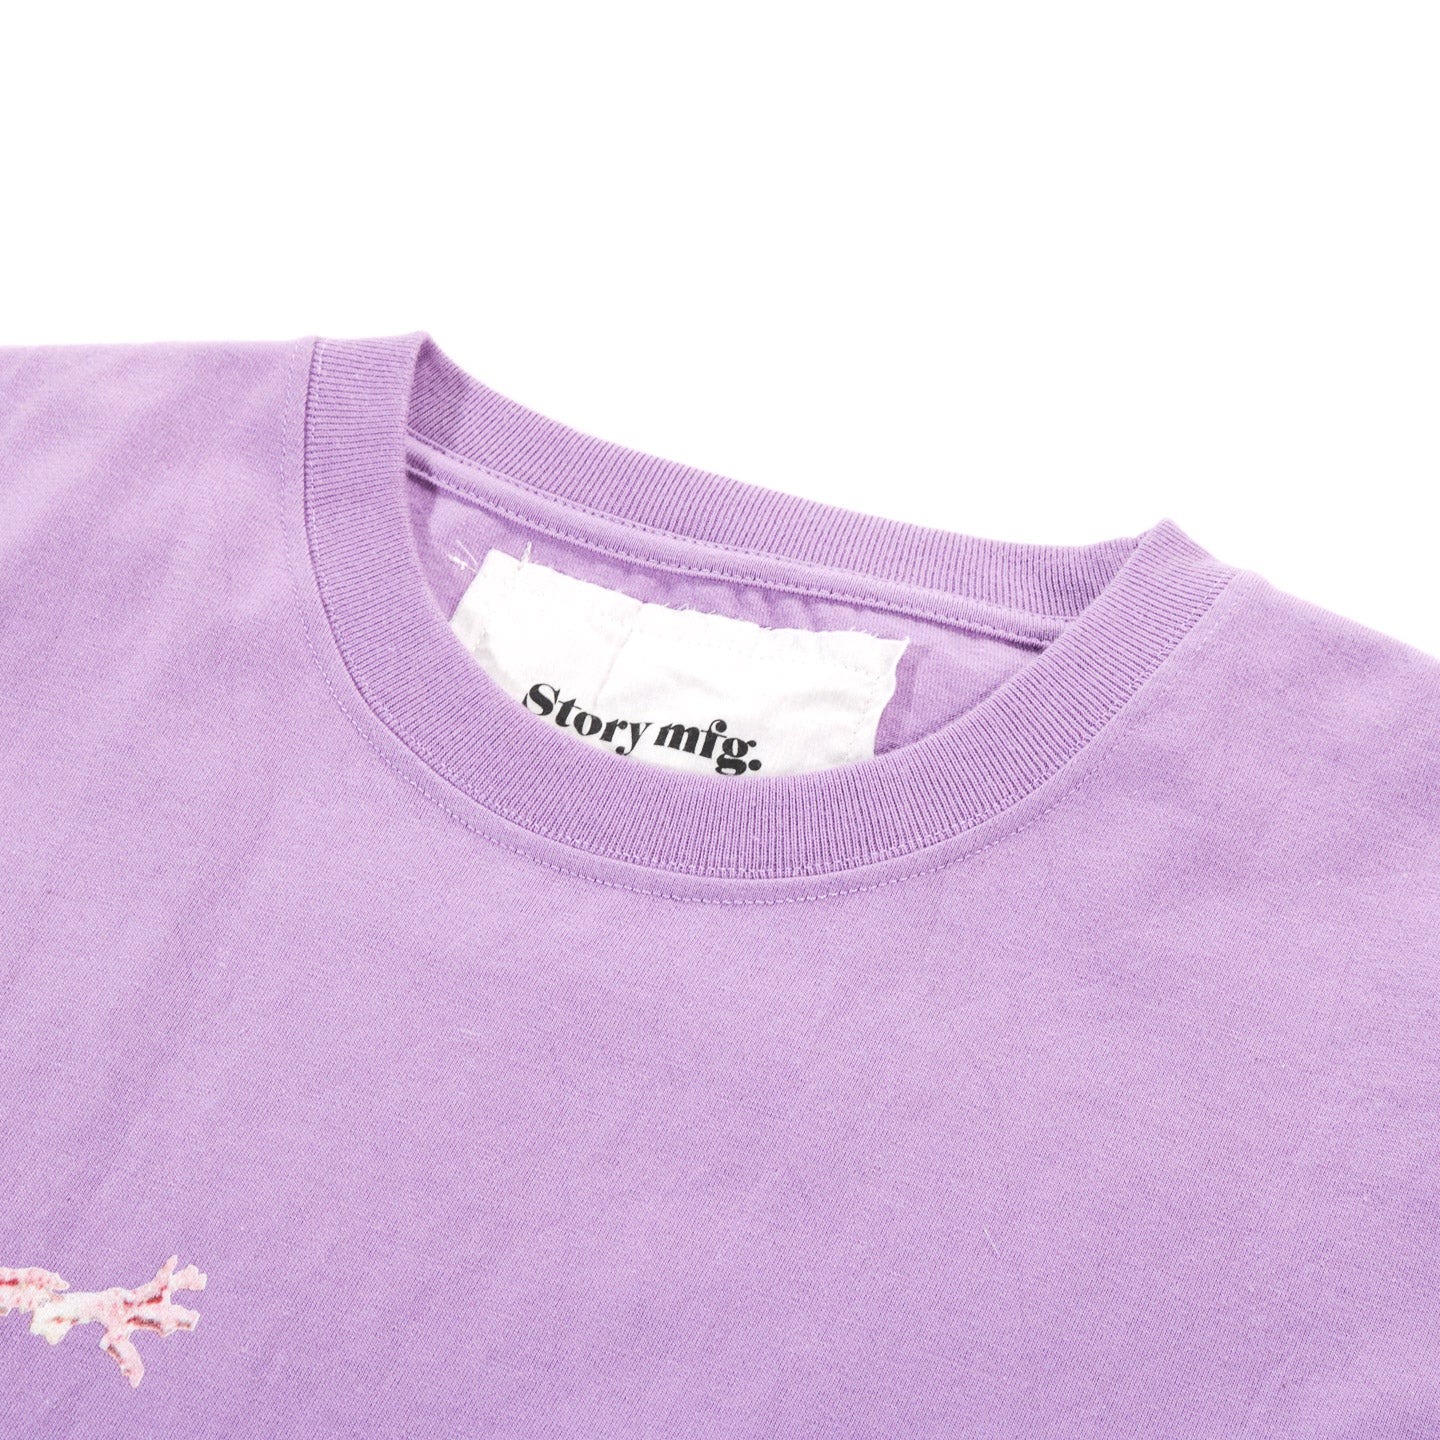 STORY MFG. GRATEFUL TEE SS LILAC SPIRAL CORAL